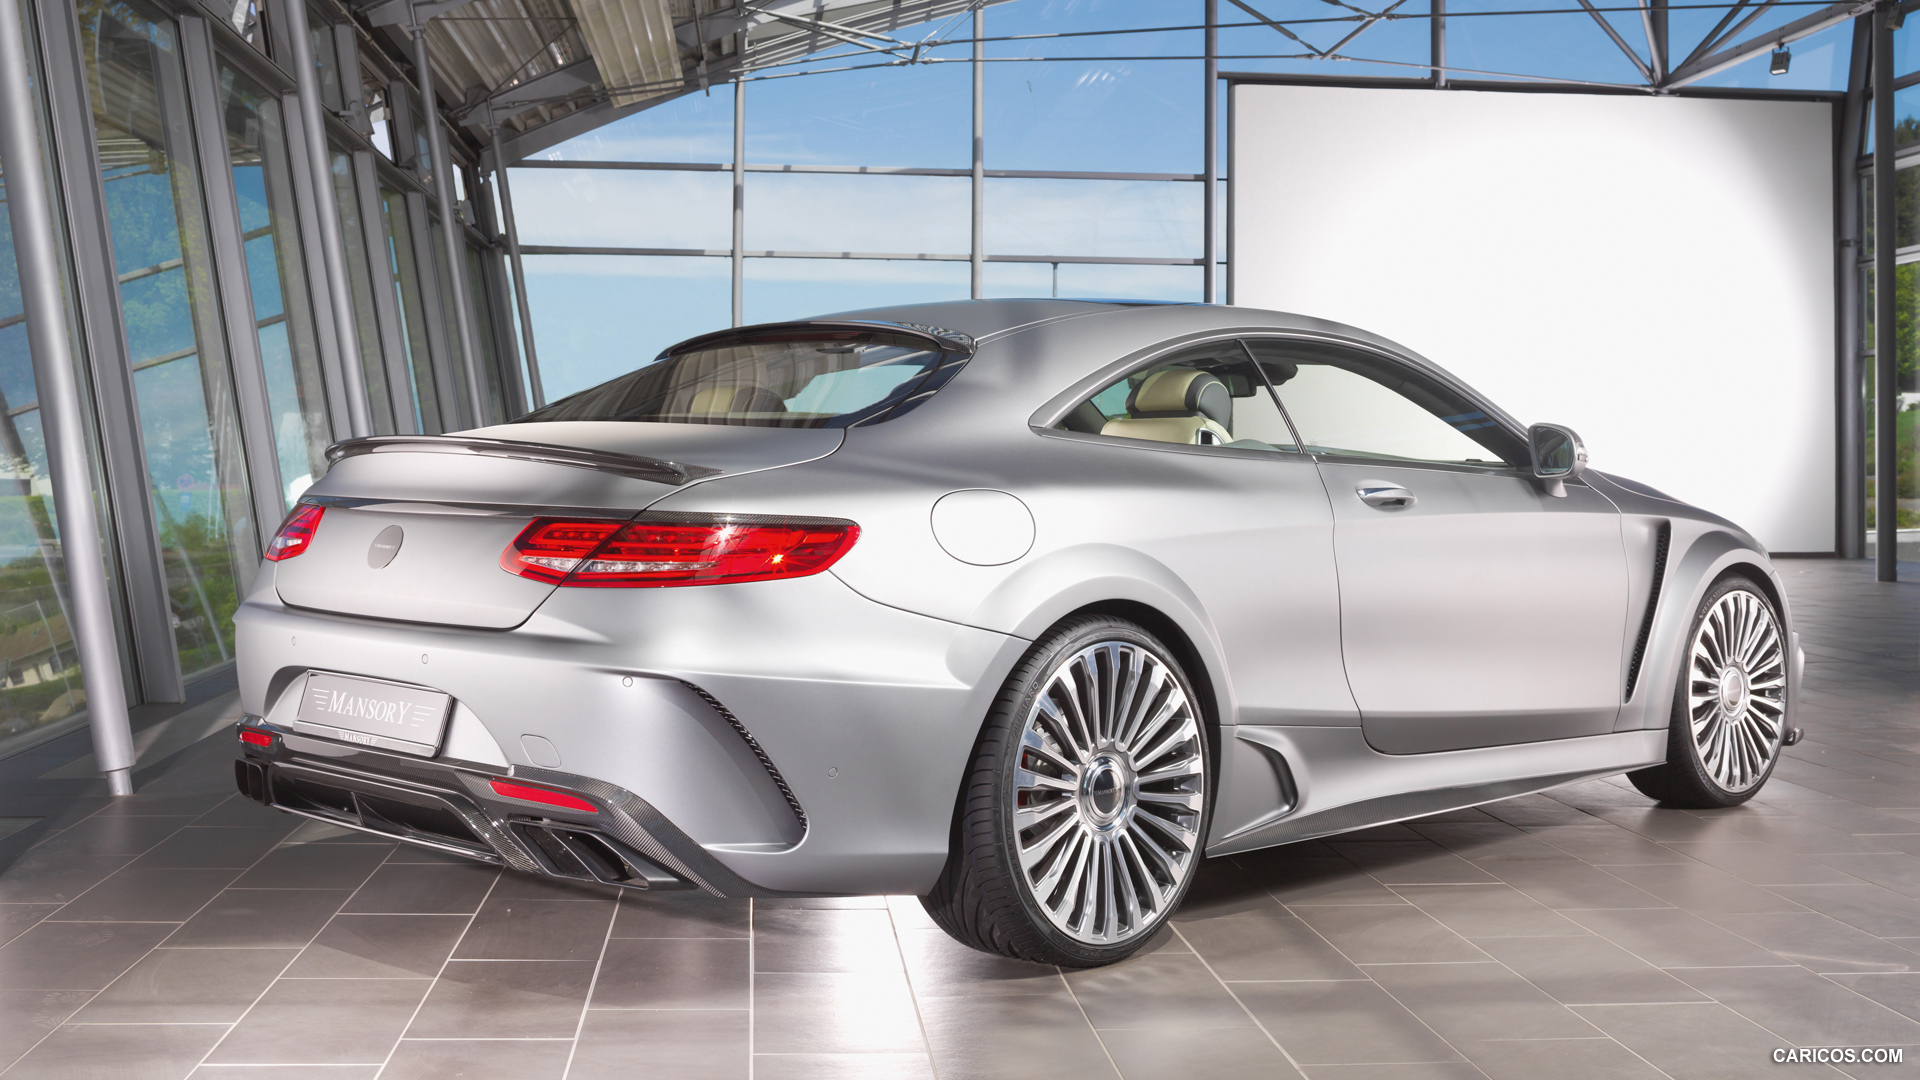 2015 Mansory Mercedes-Benz S63 AMG Coupe  - Rear, #2 of 9